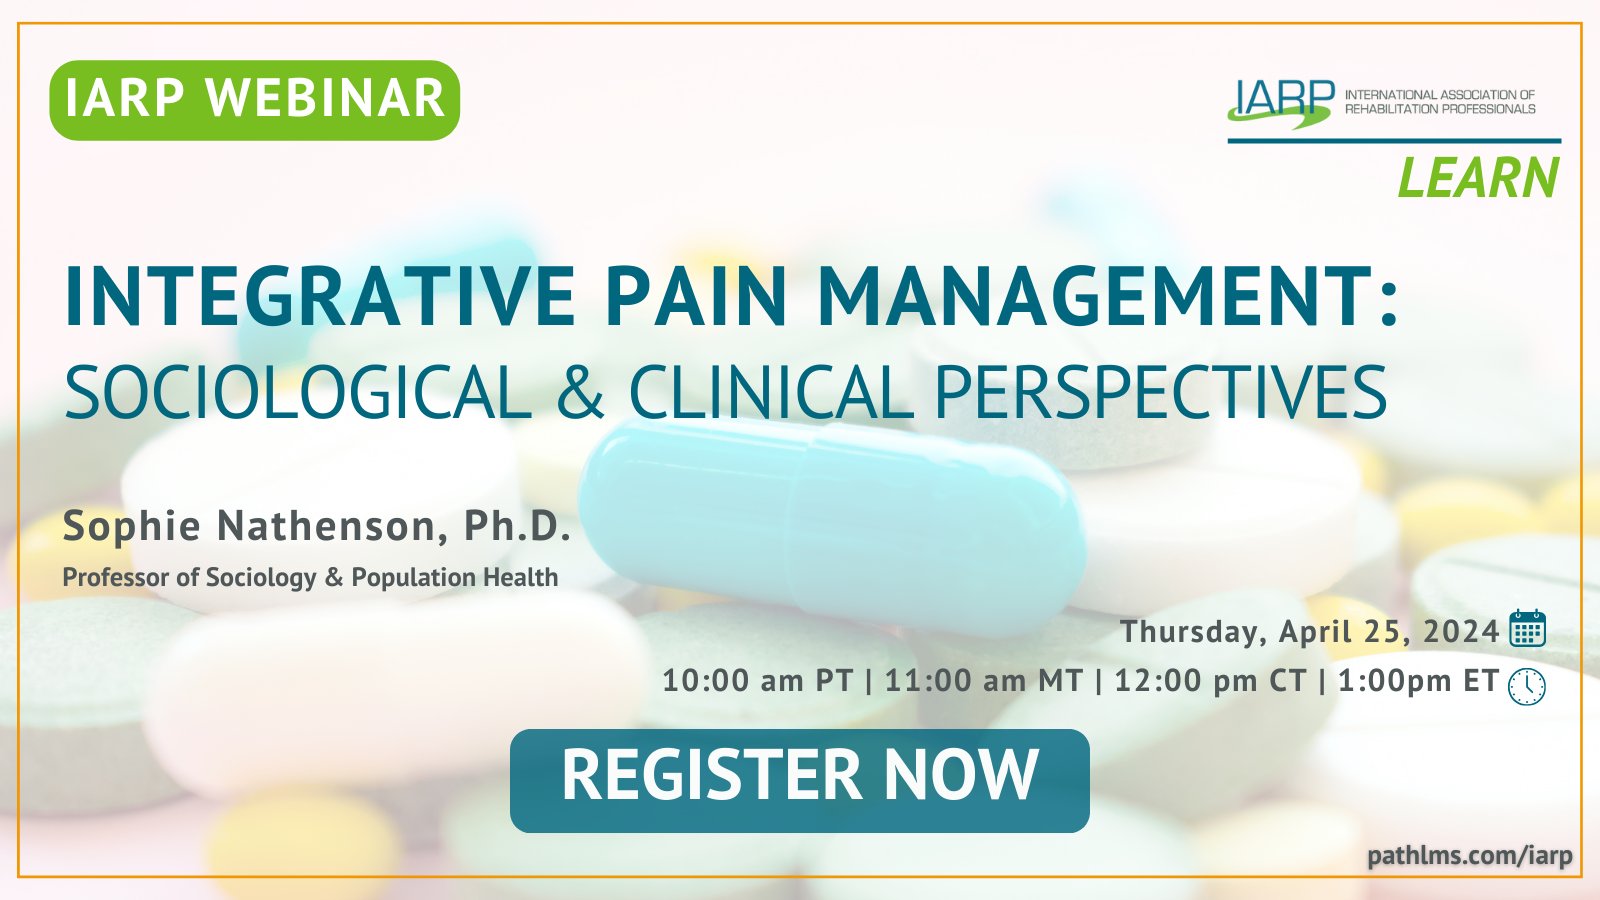 Integrative Pain Management: Sociological & Clinical Perspectives